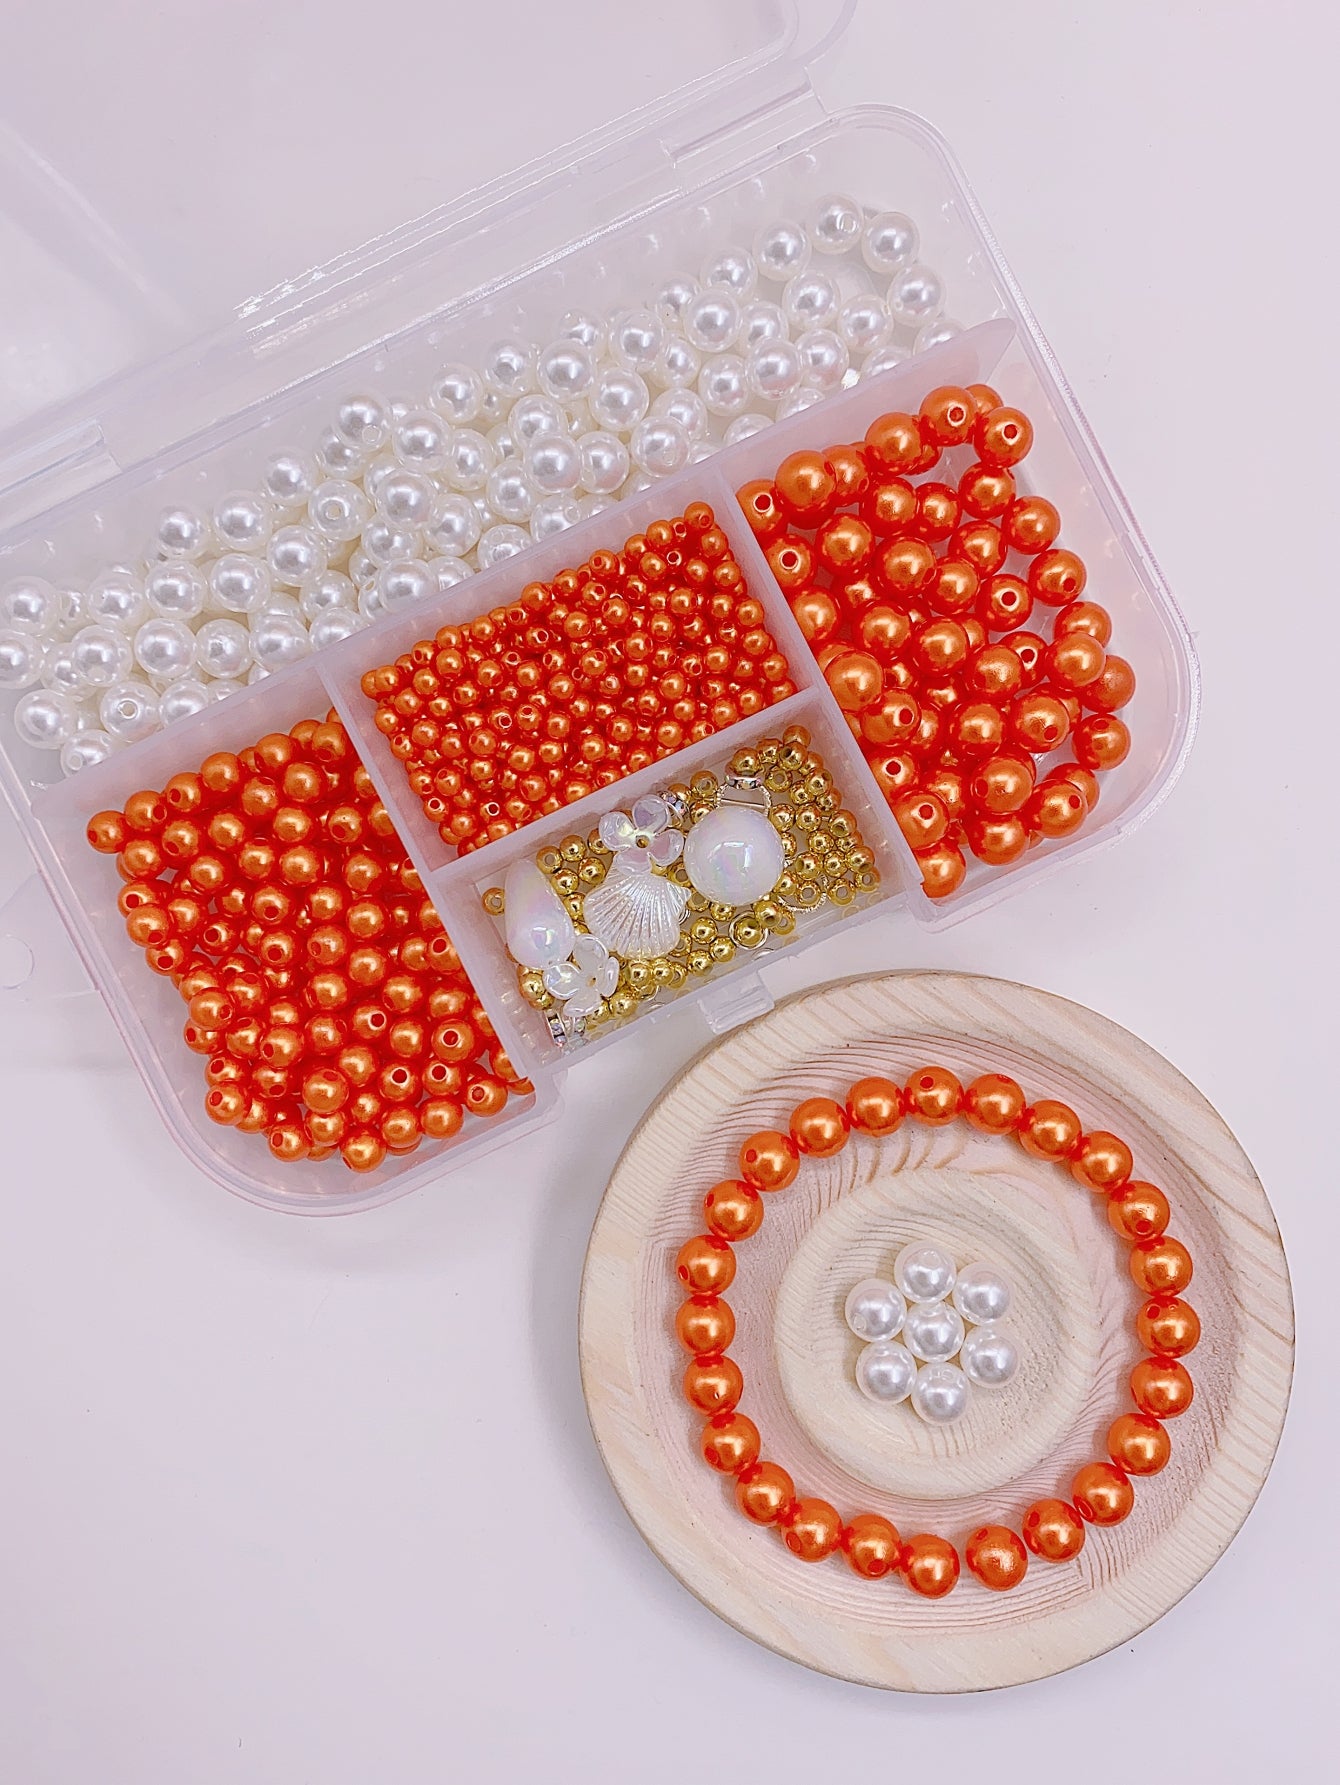 ABS high light pearl multi-palace mixed match box straight hole pearl diy jewelry accessories loose bead material box